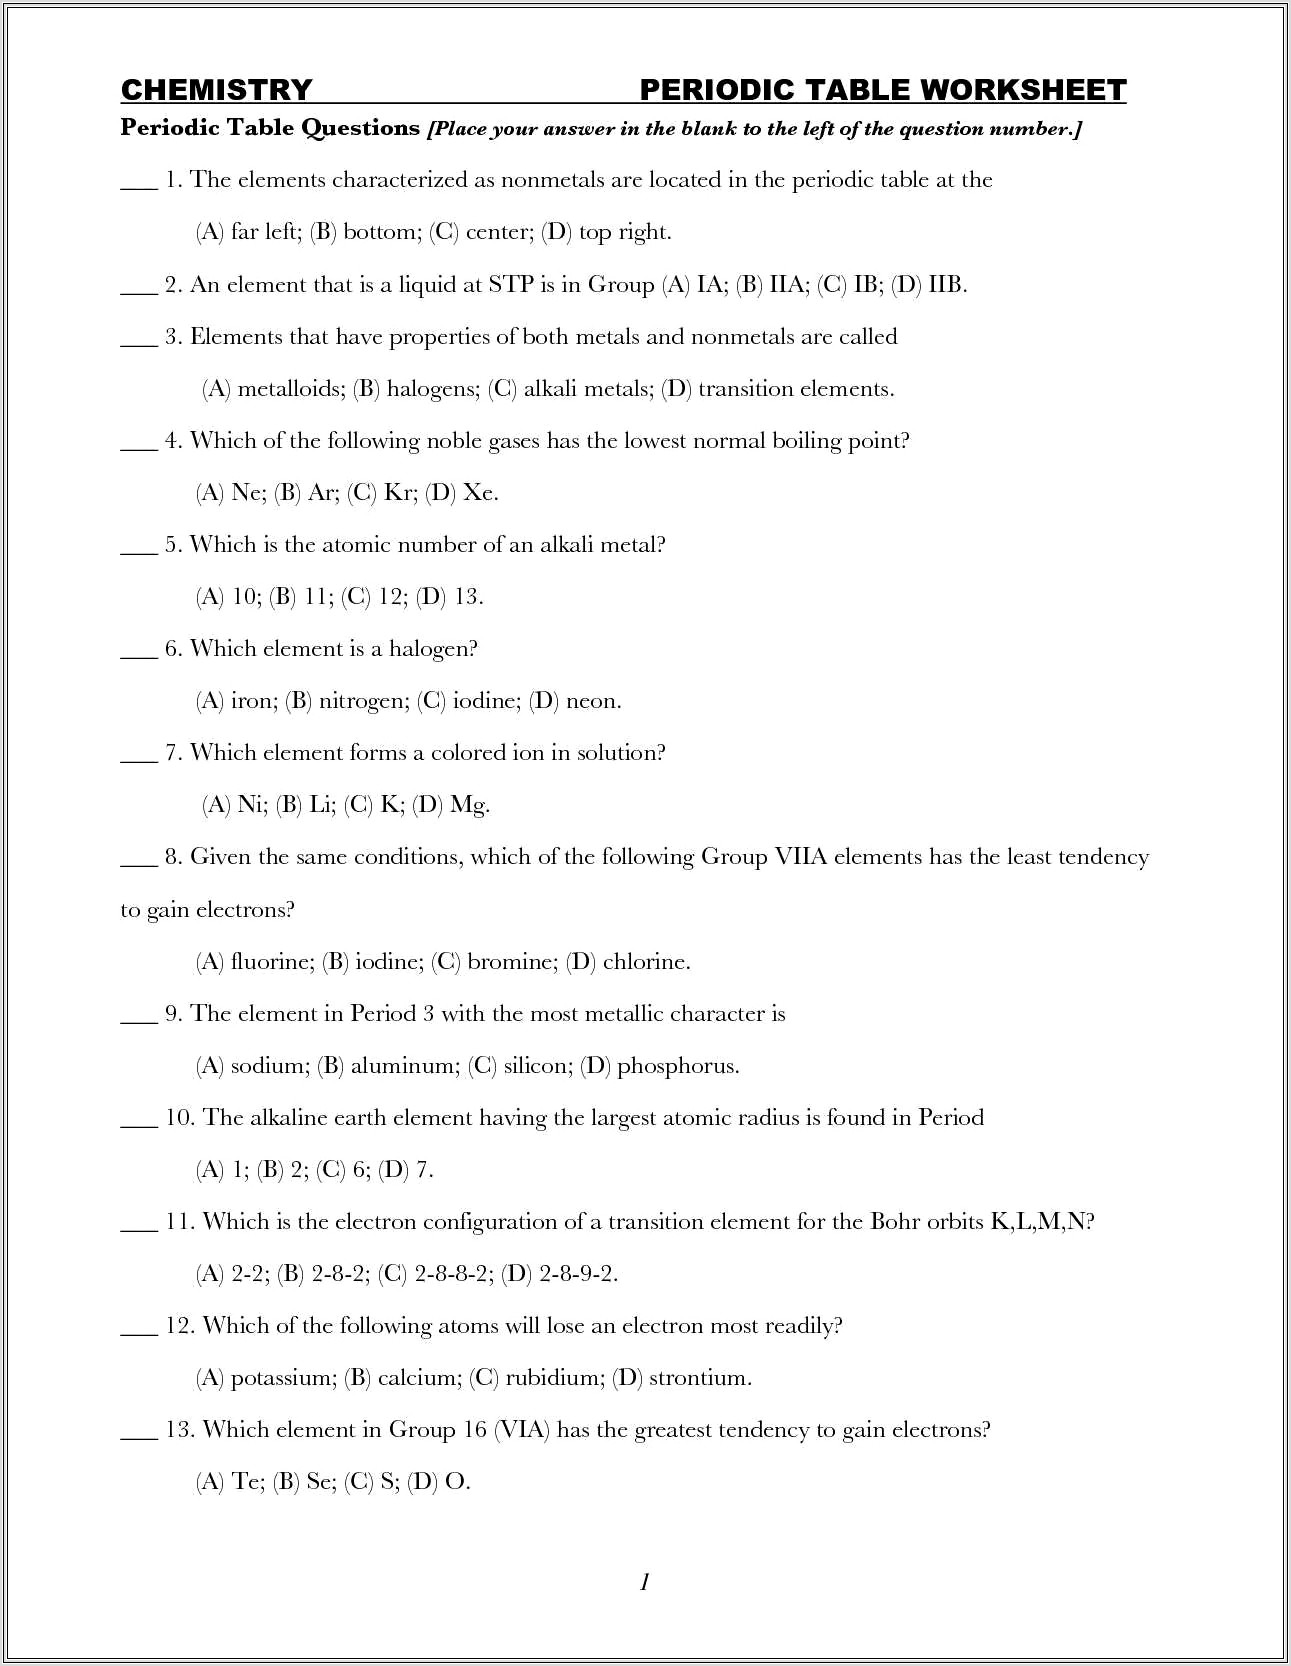 History Of The Periodic Table Worksheet Answers